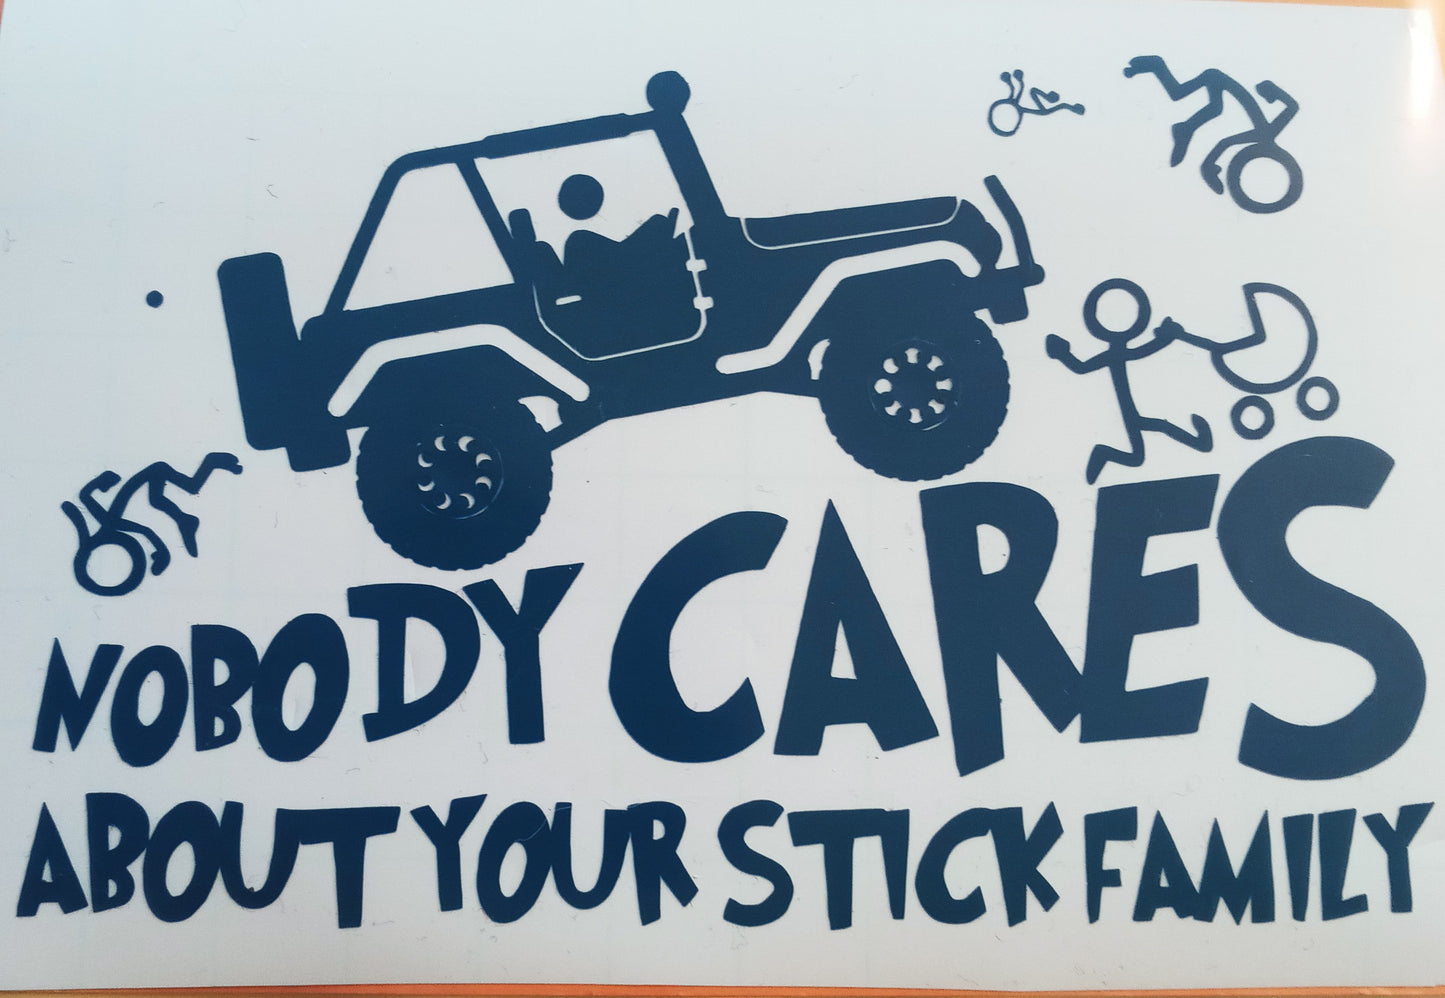 Nobody Cares Decal